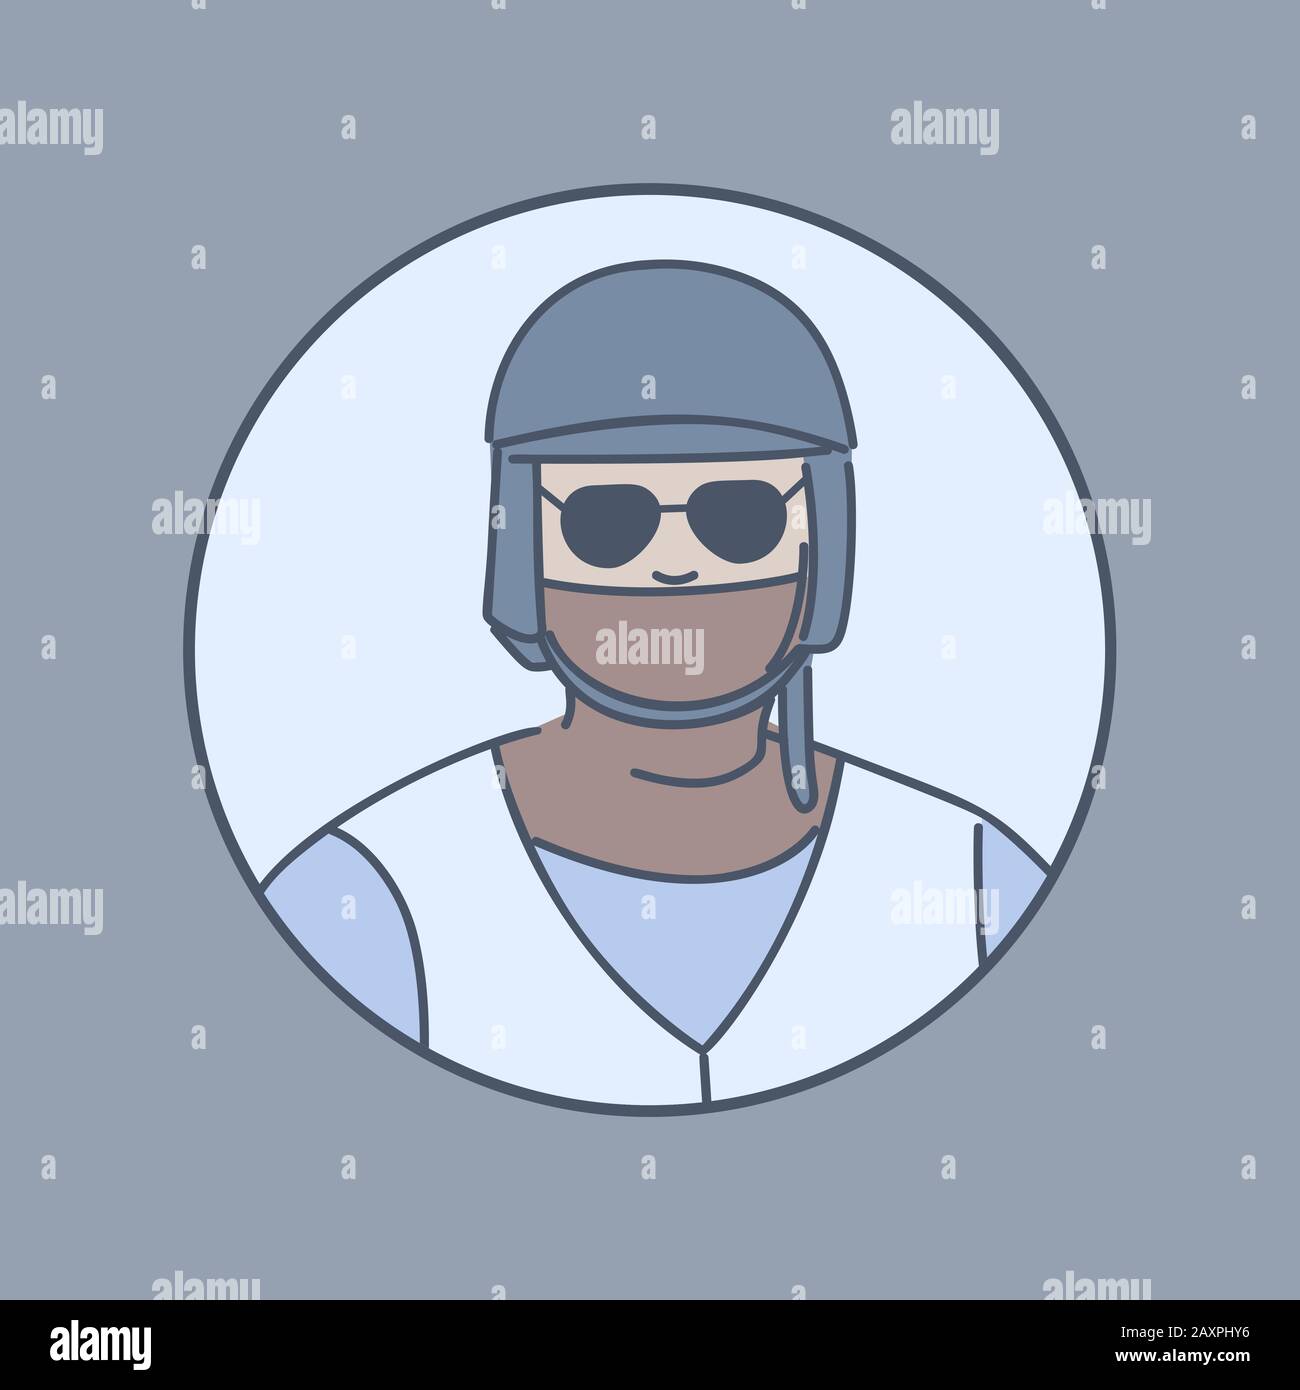 Policeman in a mask in round shaped frame cartoon illustration. Security guard, capture group member in uniform protects law and order outline character. Police officer vector concept. Stock Vector